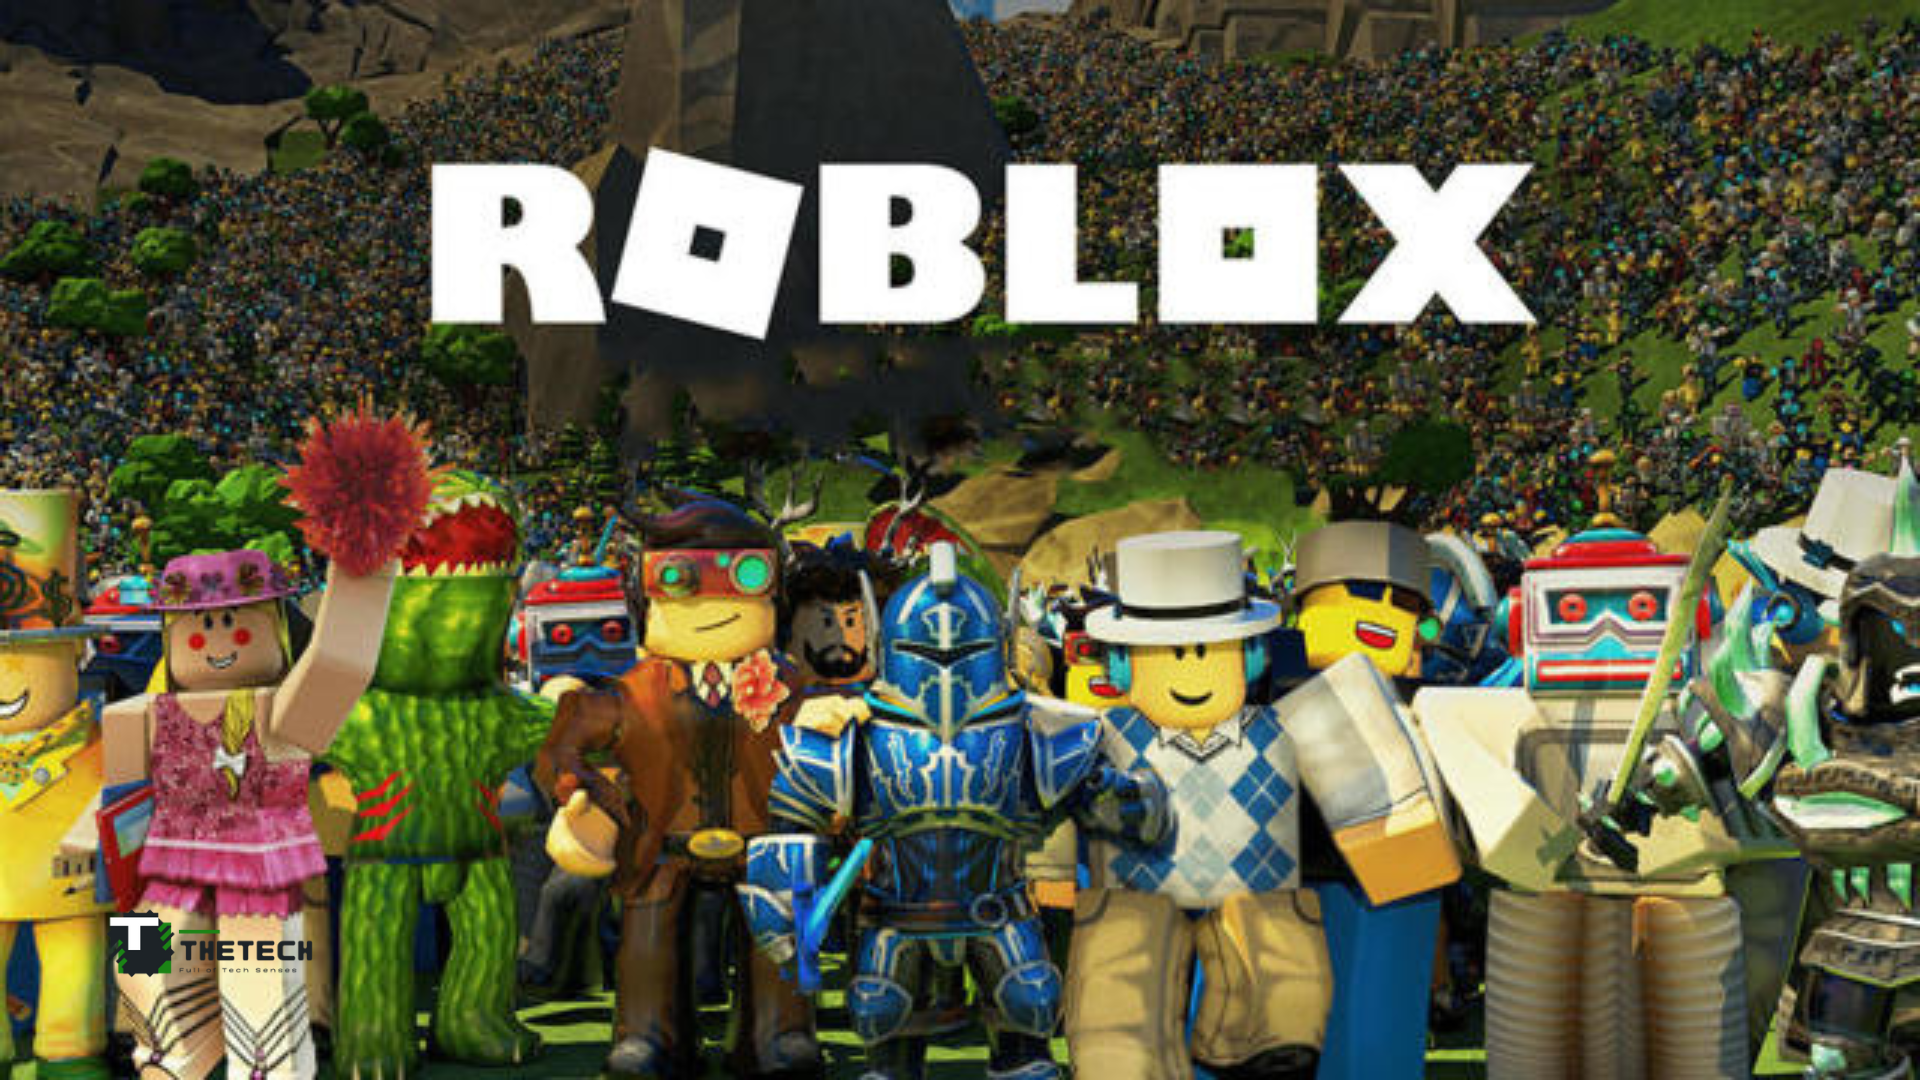 Roblox plans PlayStation debut, new world-building AI tools